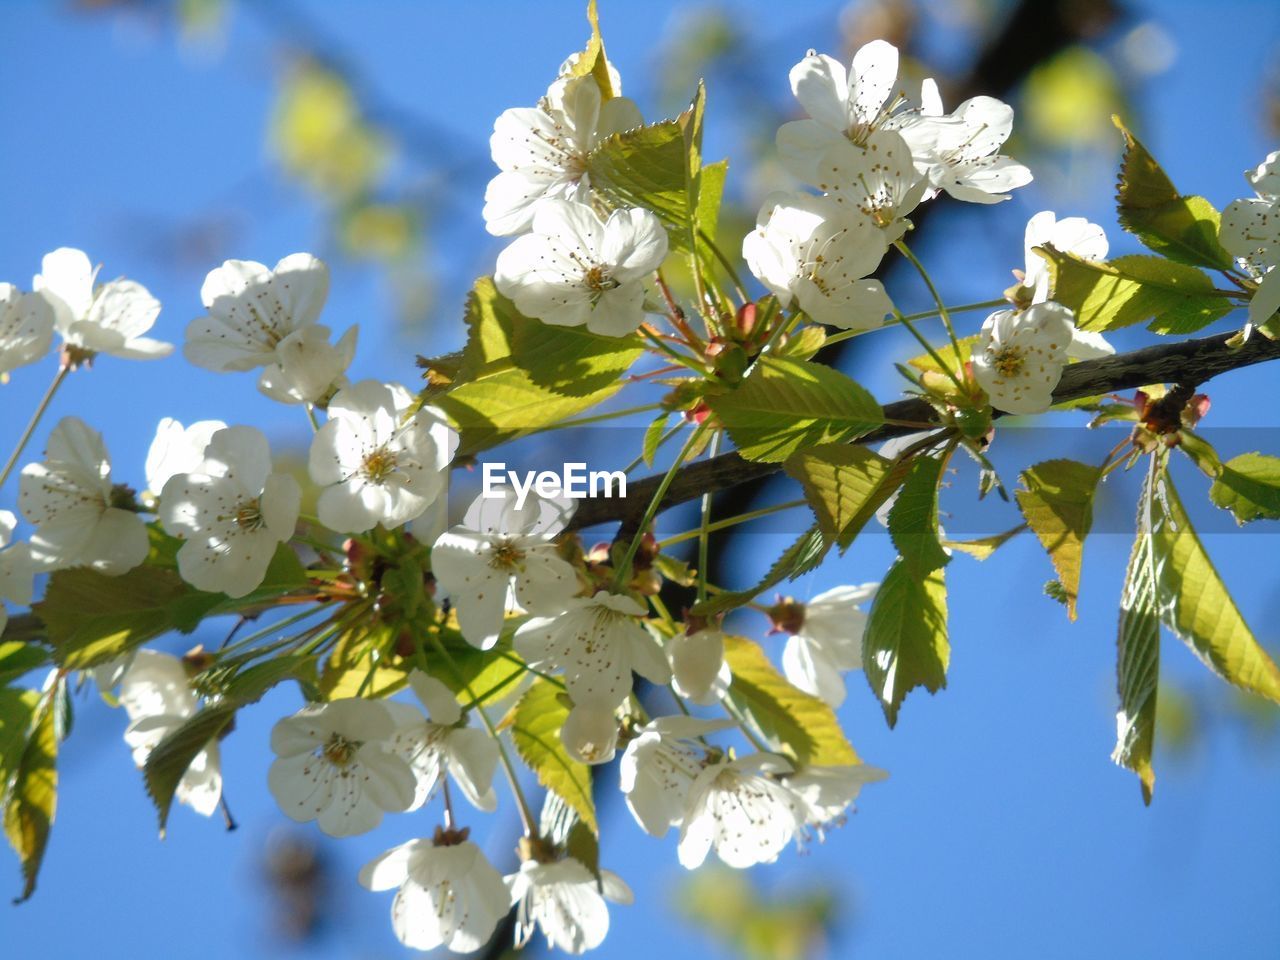 CLOSE-UP OF FRESH WHITE FLOWERS BLOOMING ON TREE AGAINST SKY